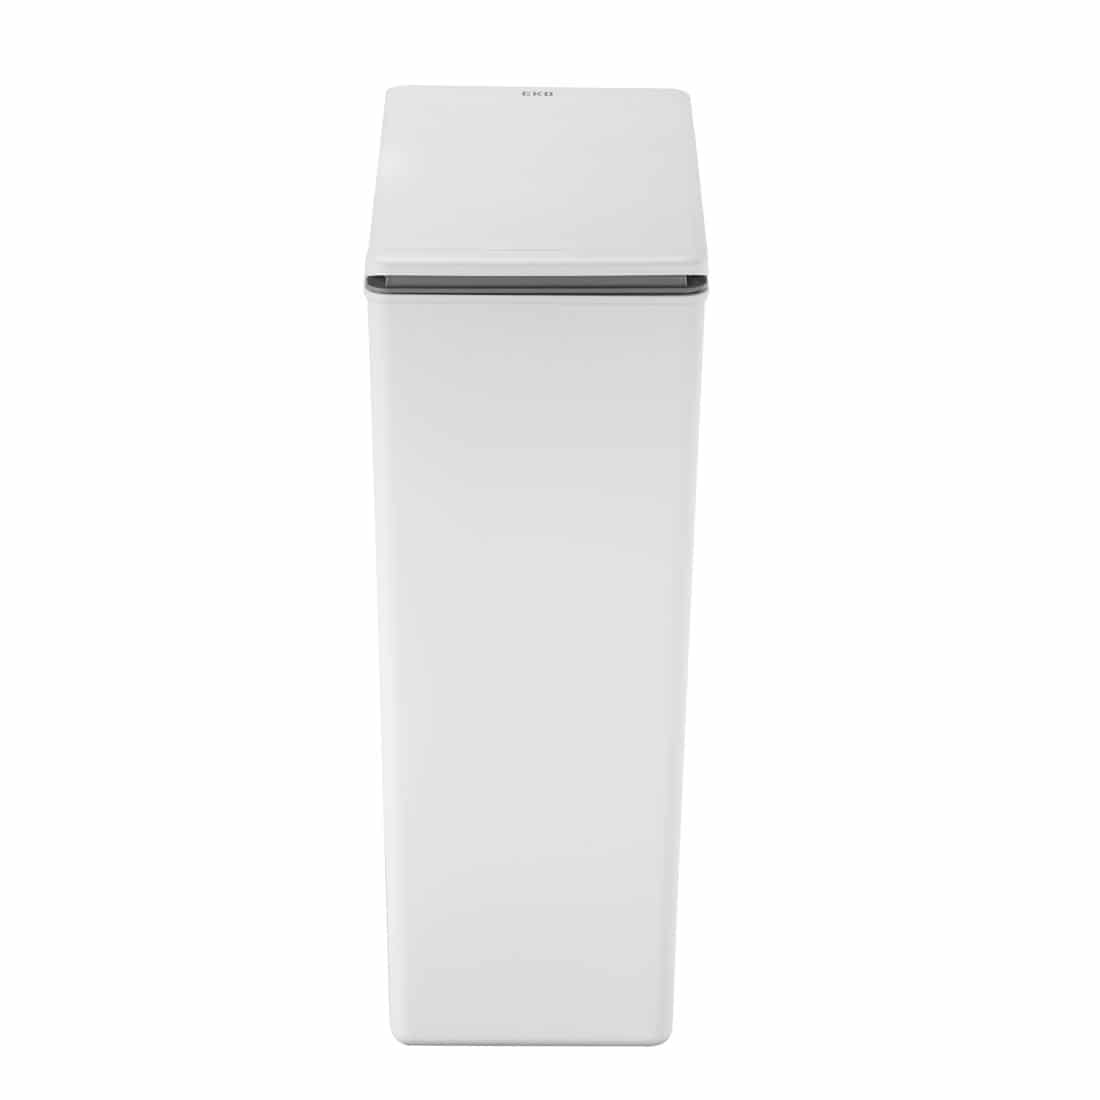 Morandi Touch Bin 40L Separate waste bin, connectable for recycling white